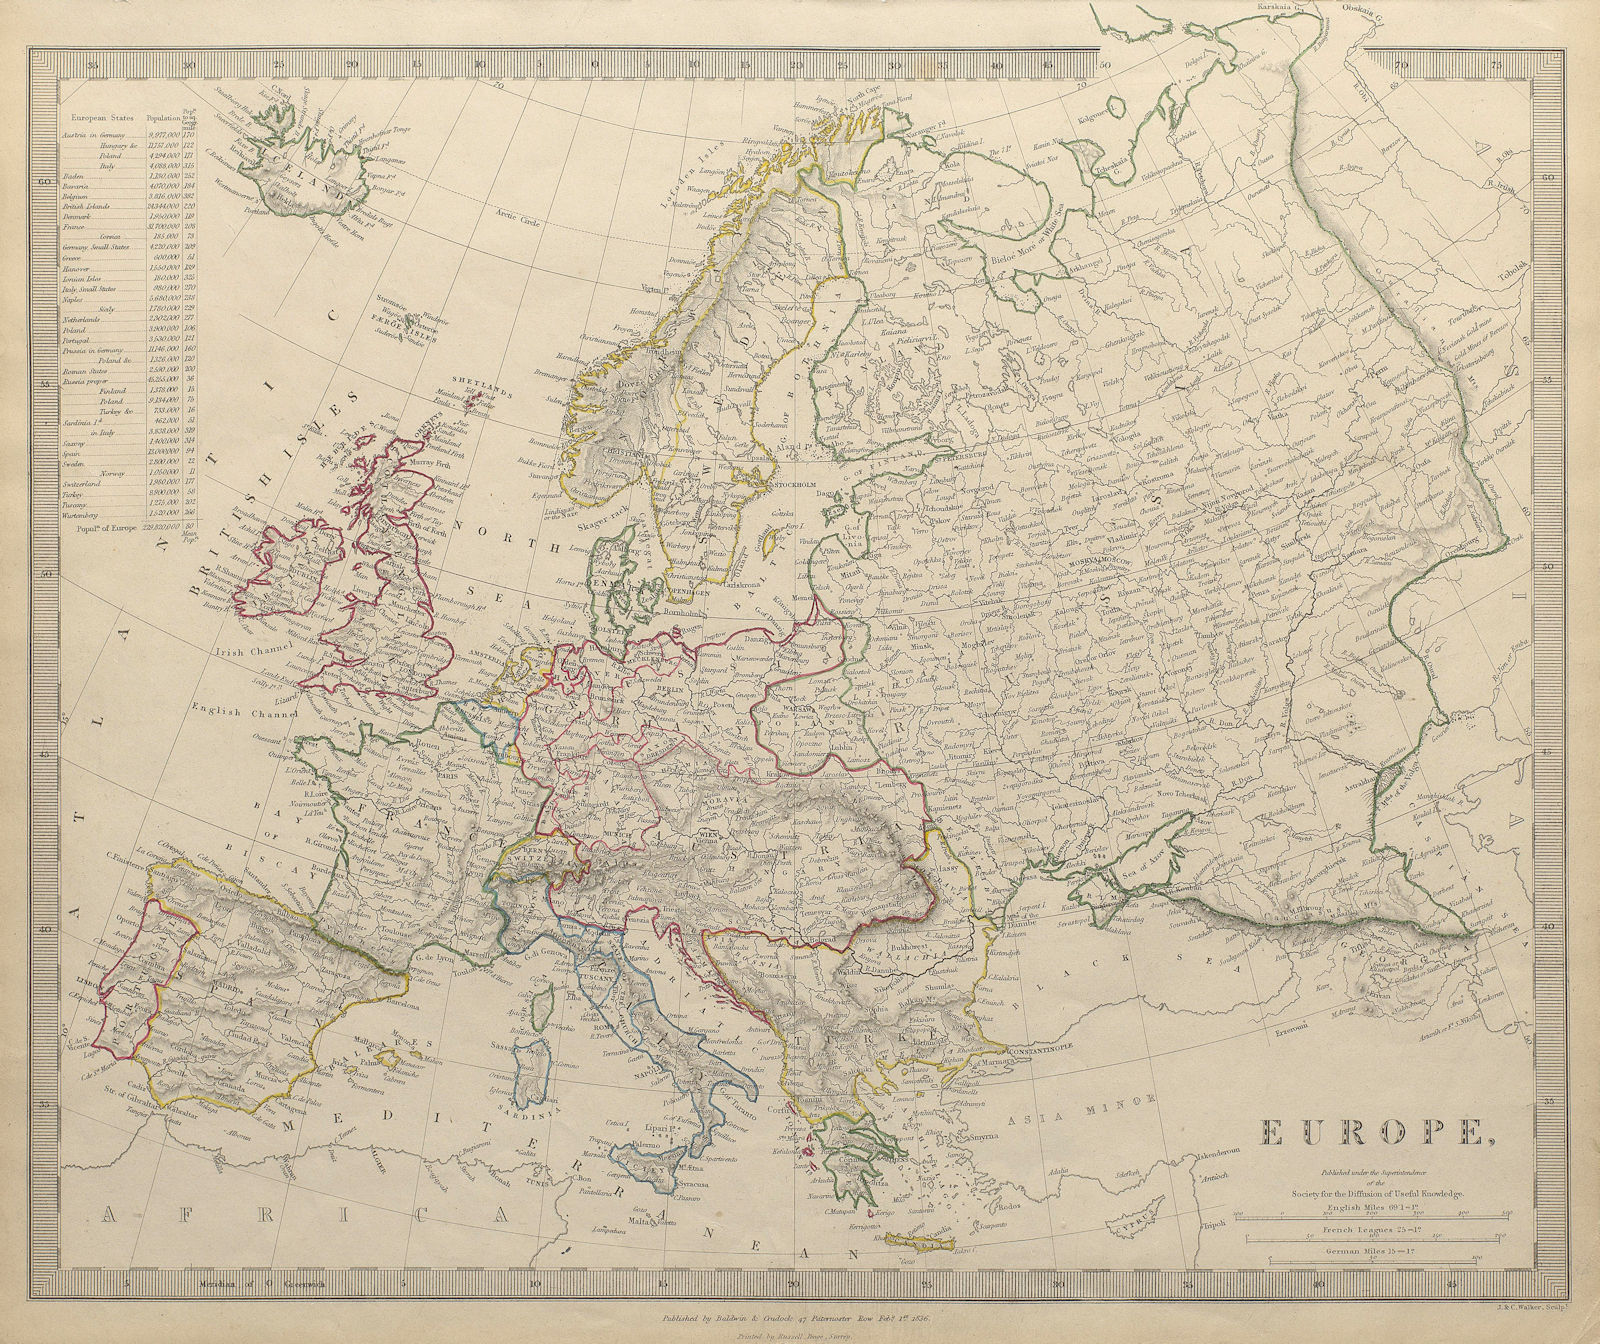 EUROPE. General map. Inset table of population & density by country. SDUK 1844